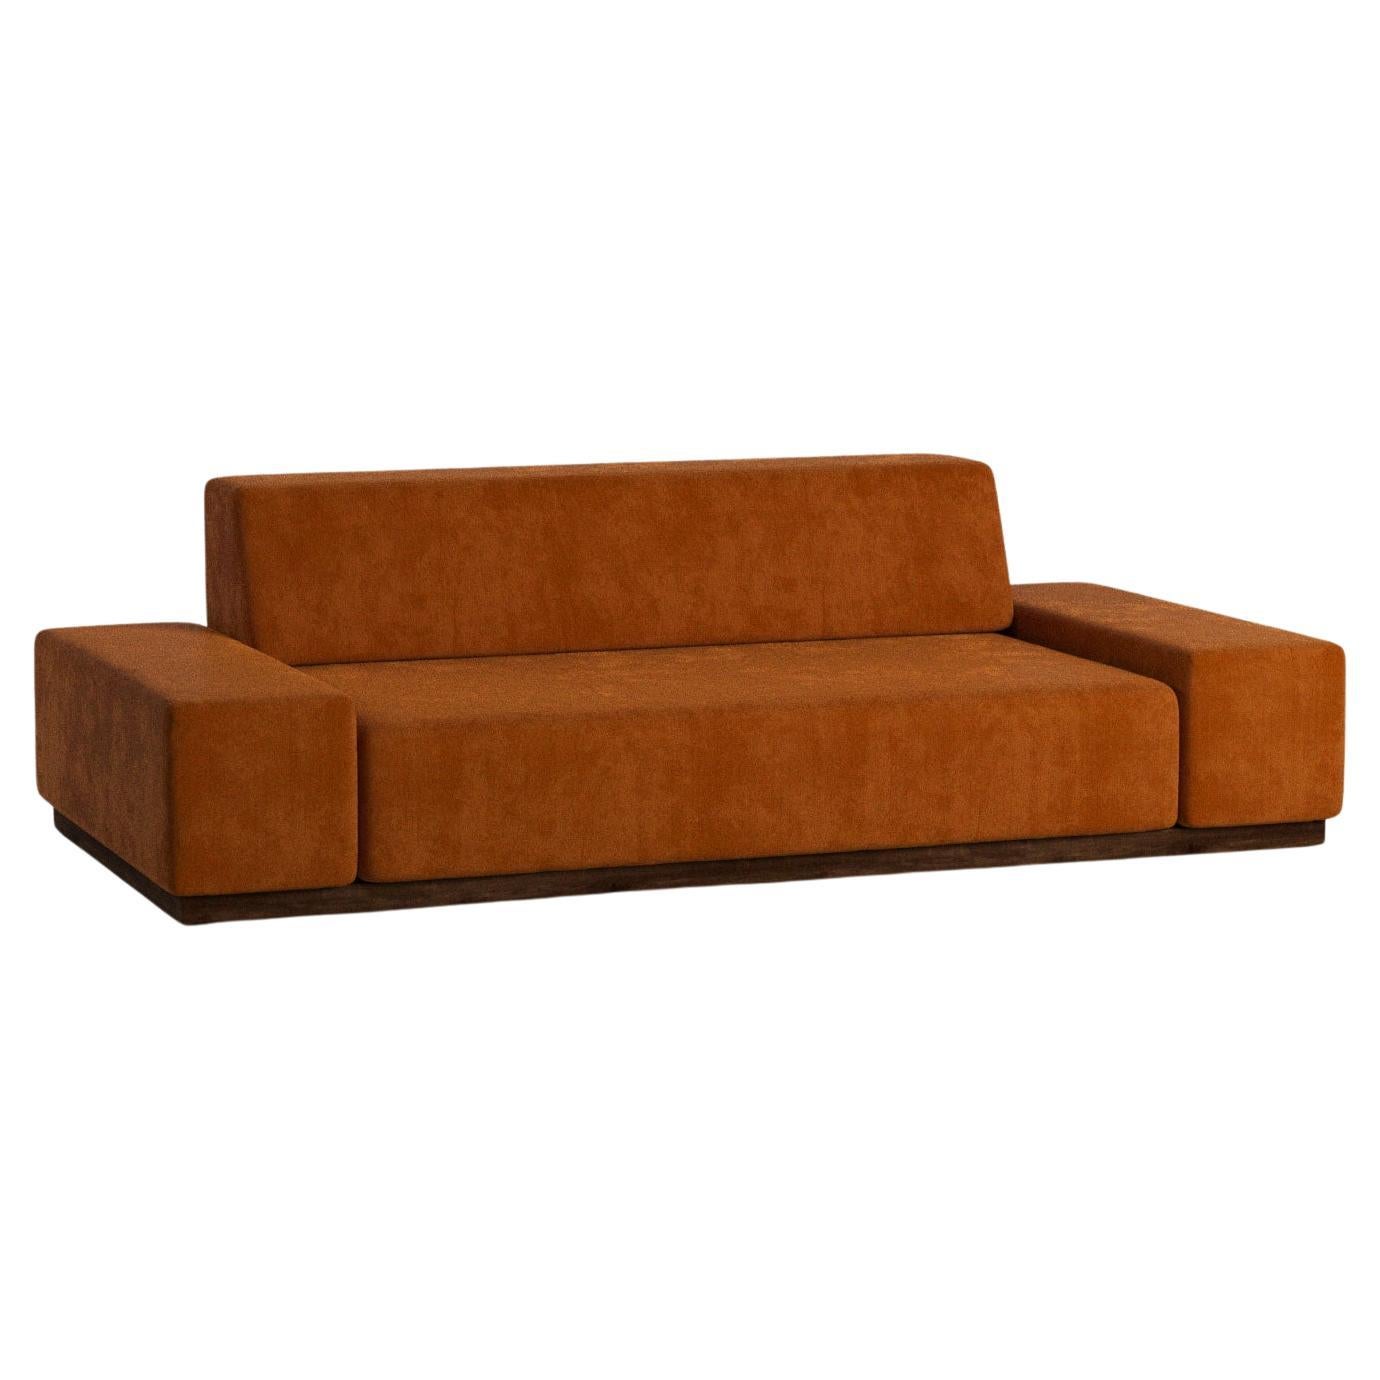 Dune Two Seater Nube Sofa by Siete Studio For Sale at 1stDibs | nube couch, dune  sofa, modular dune couch